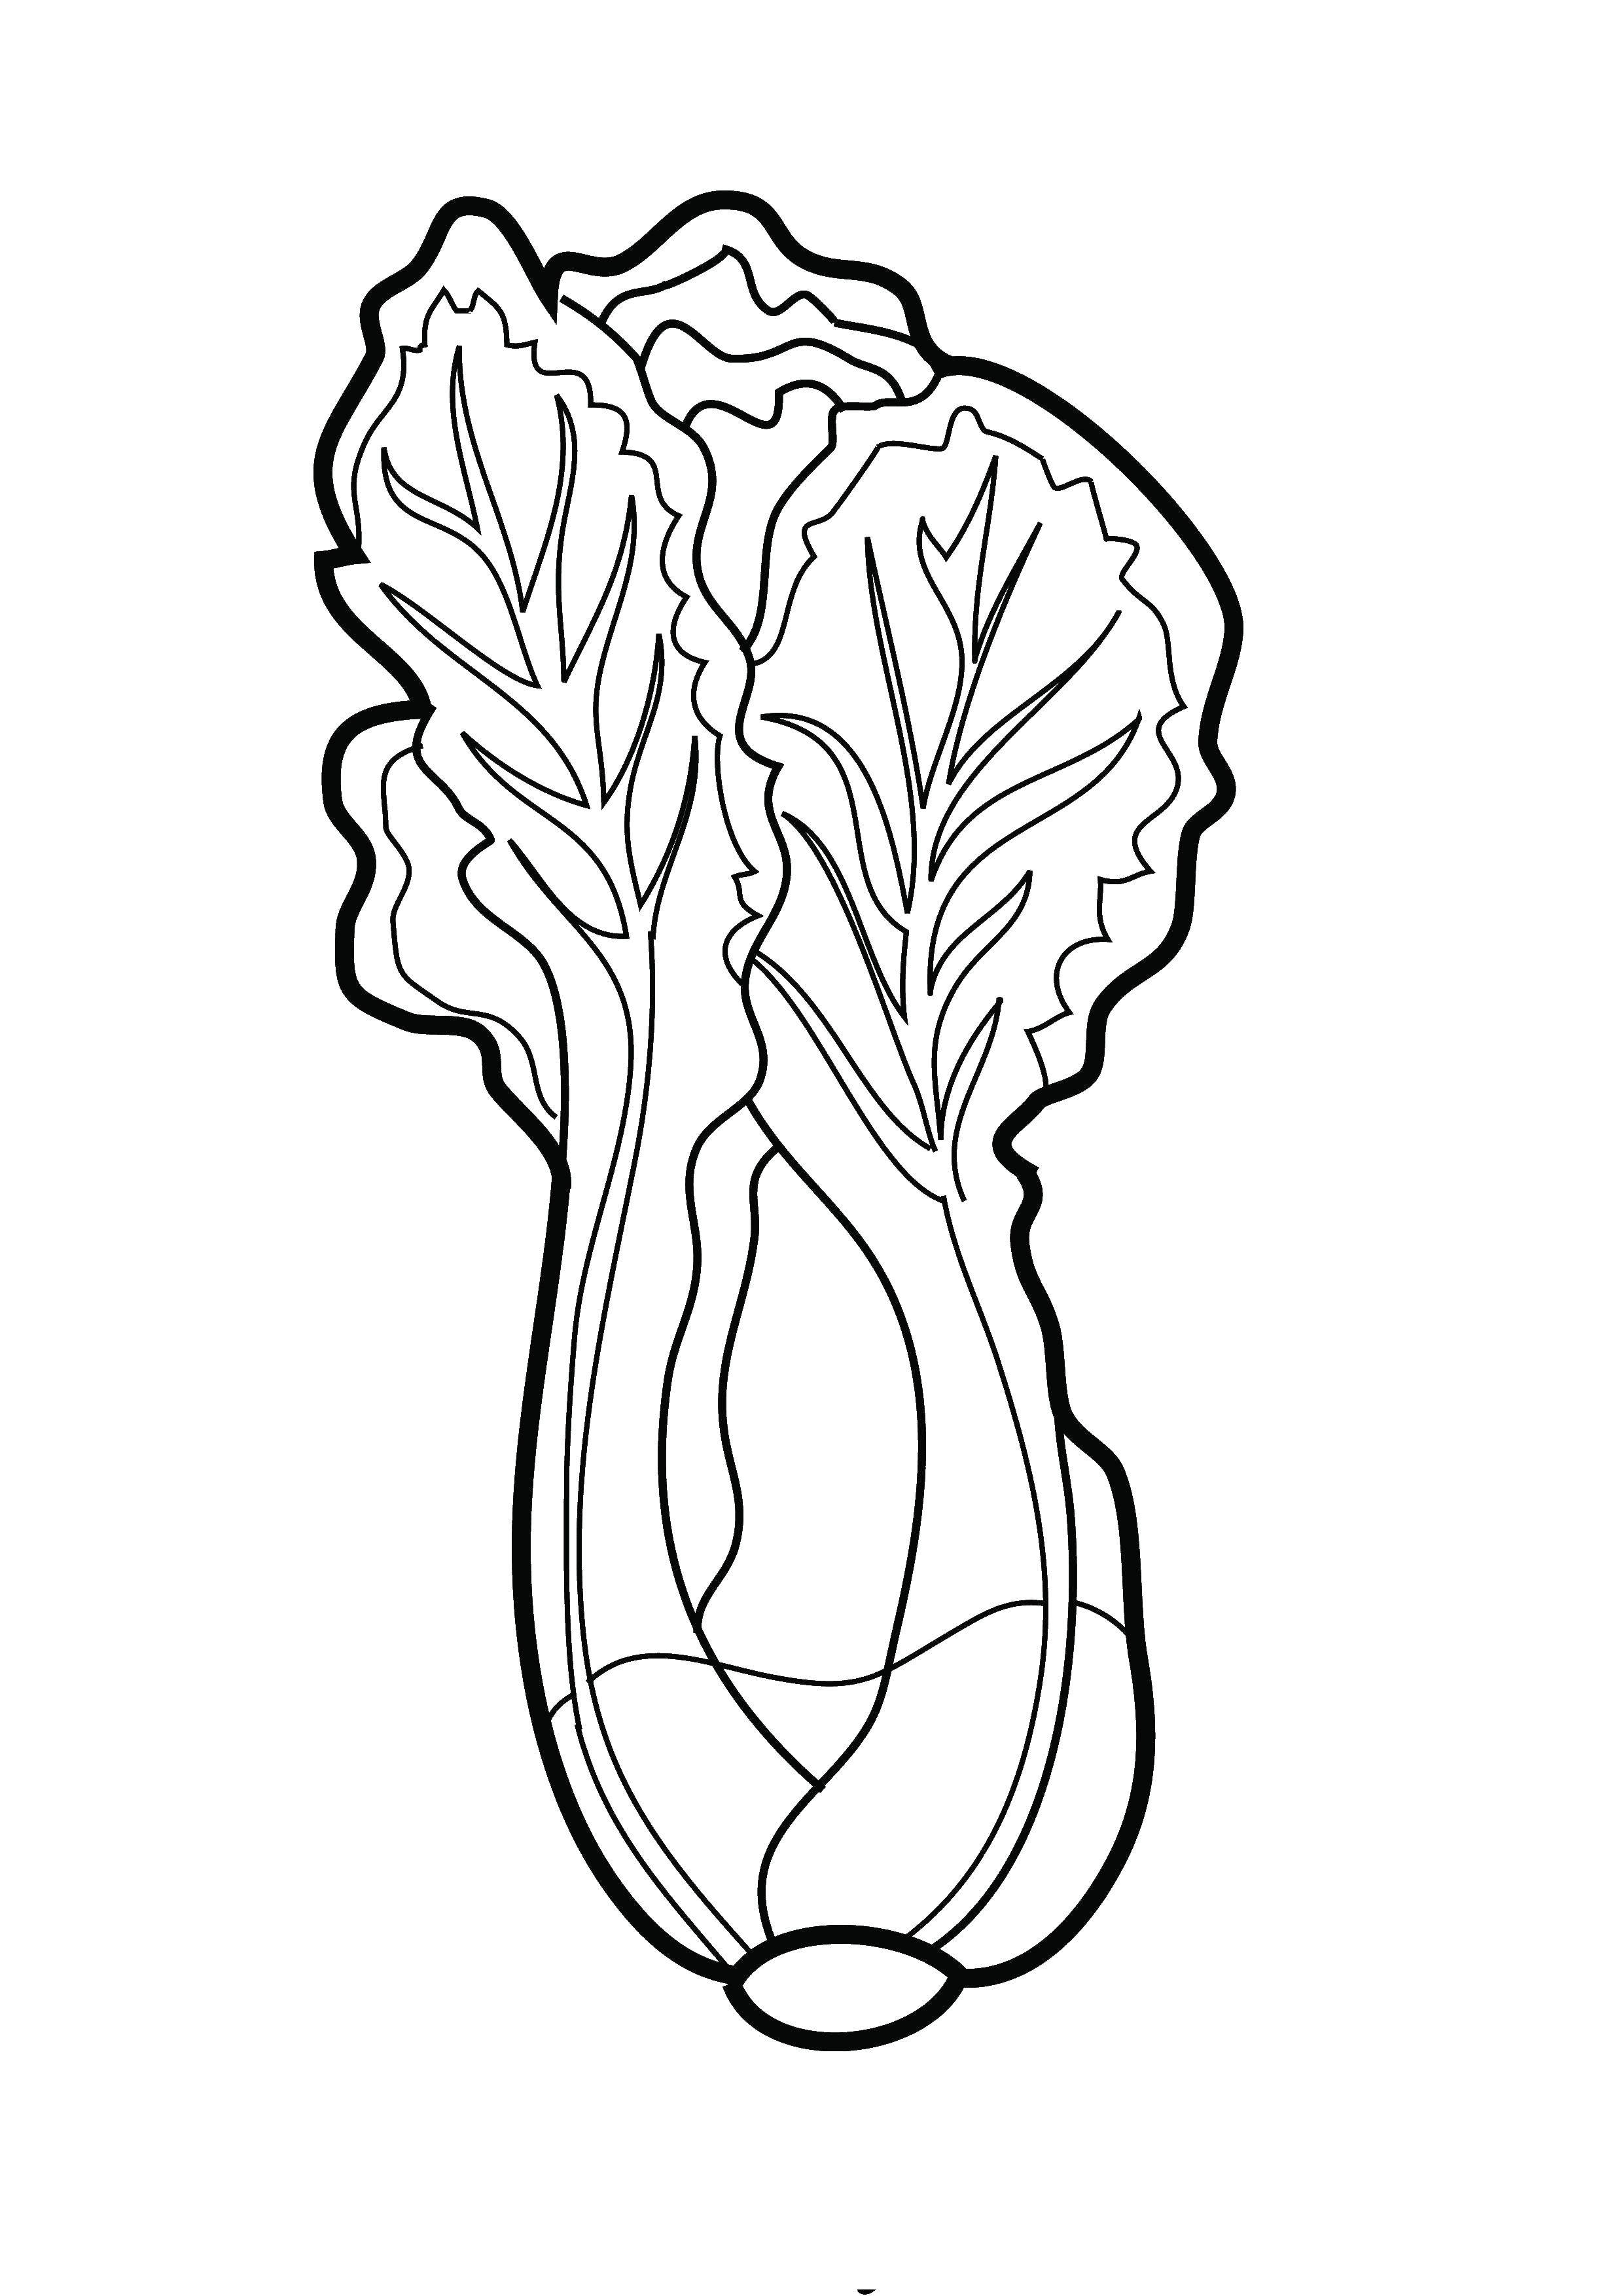 Coloring Lettuce. Category The plant. Tags:  leaves, lettuce, Plant.